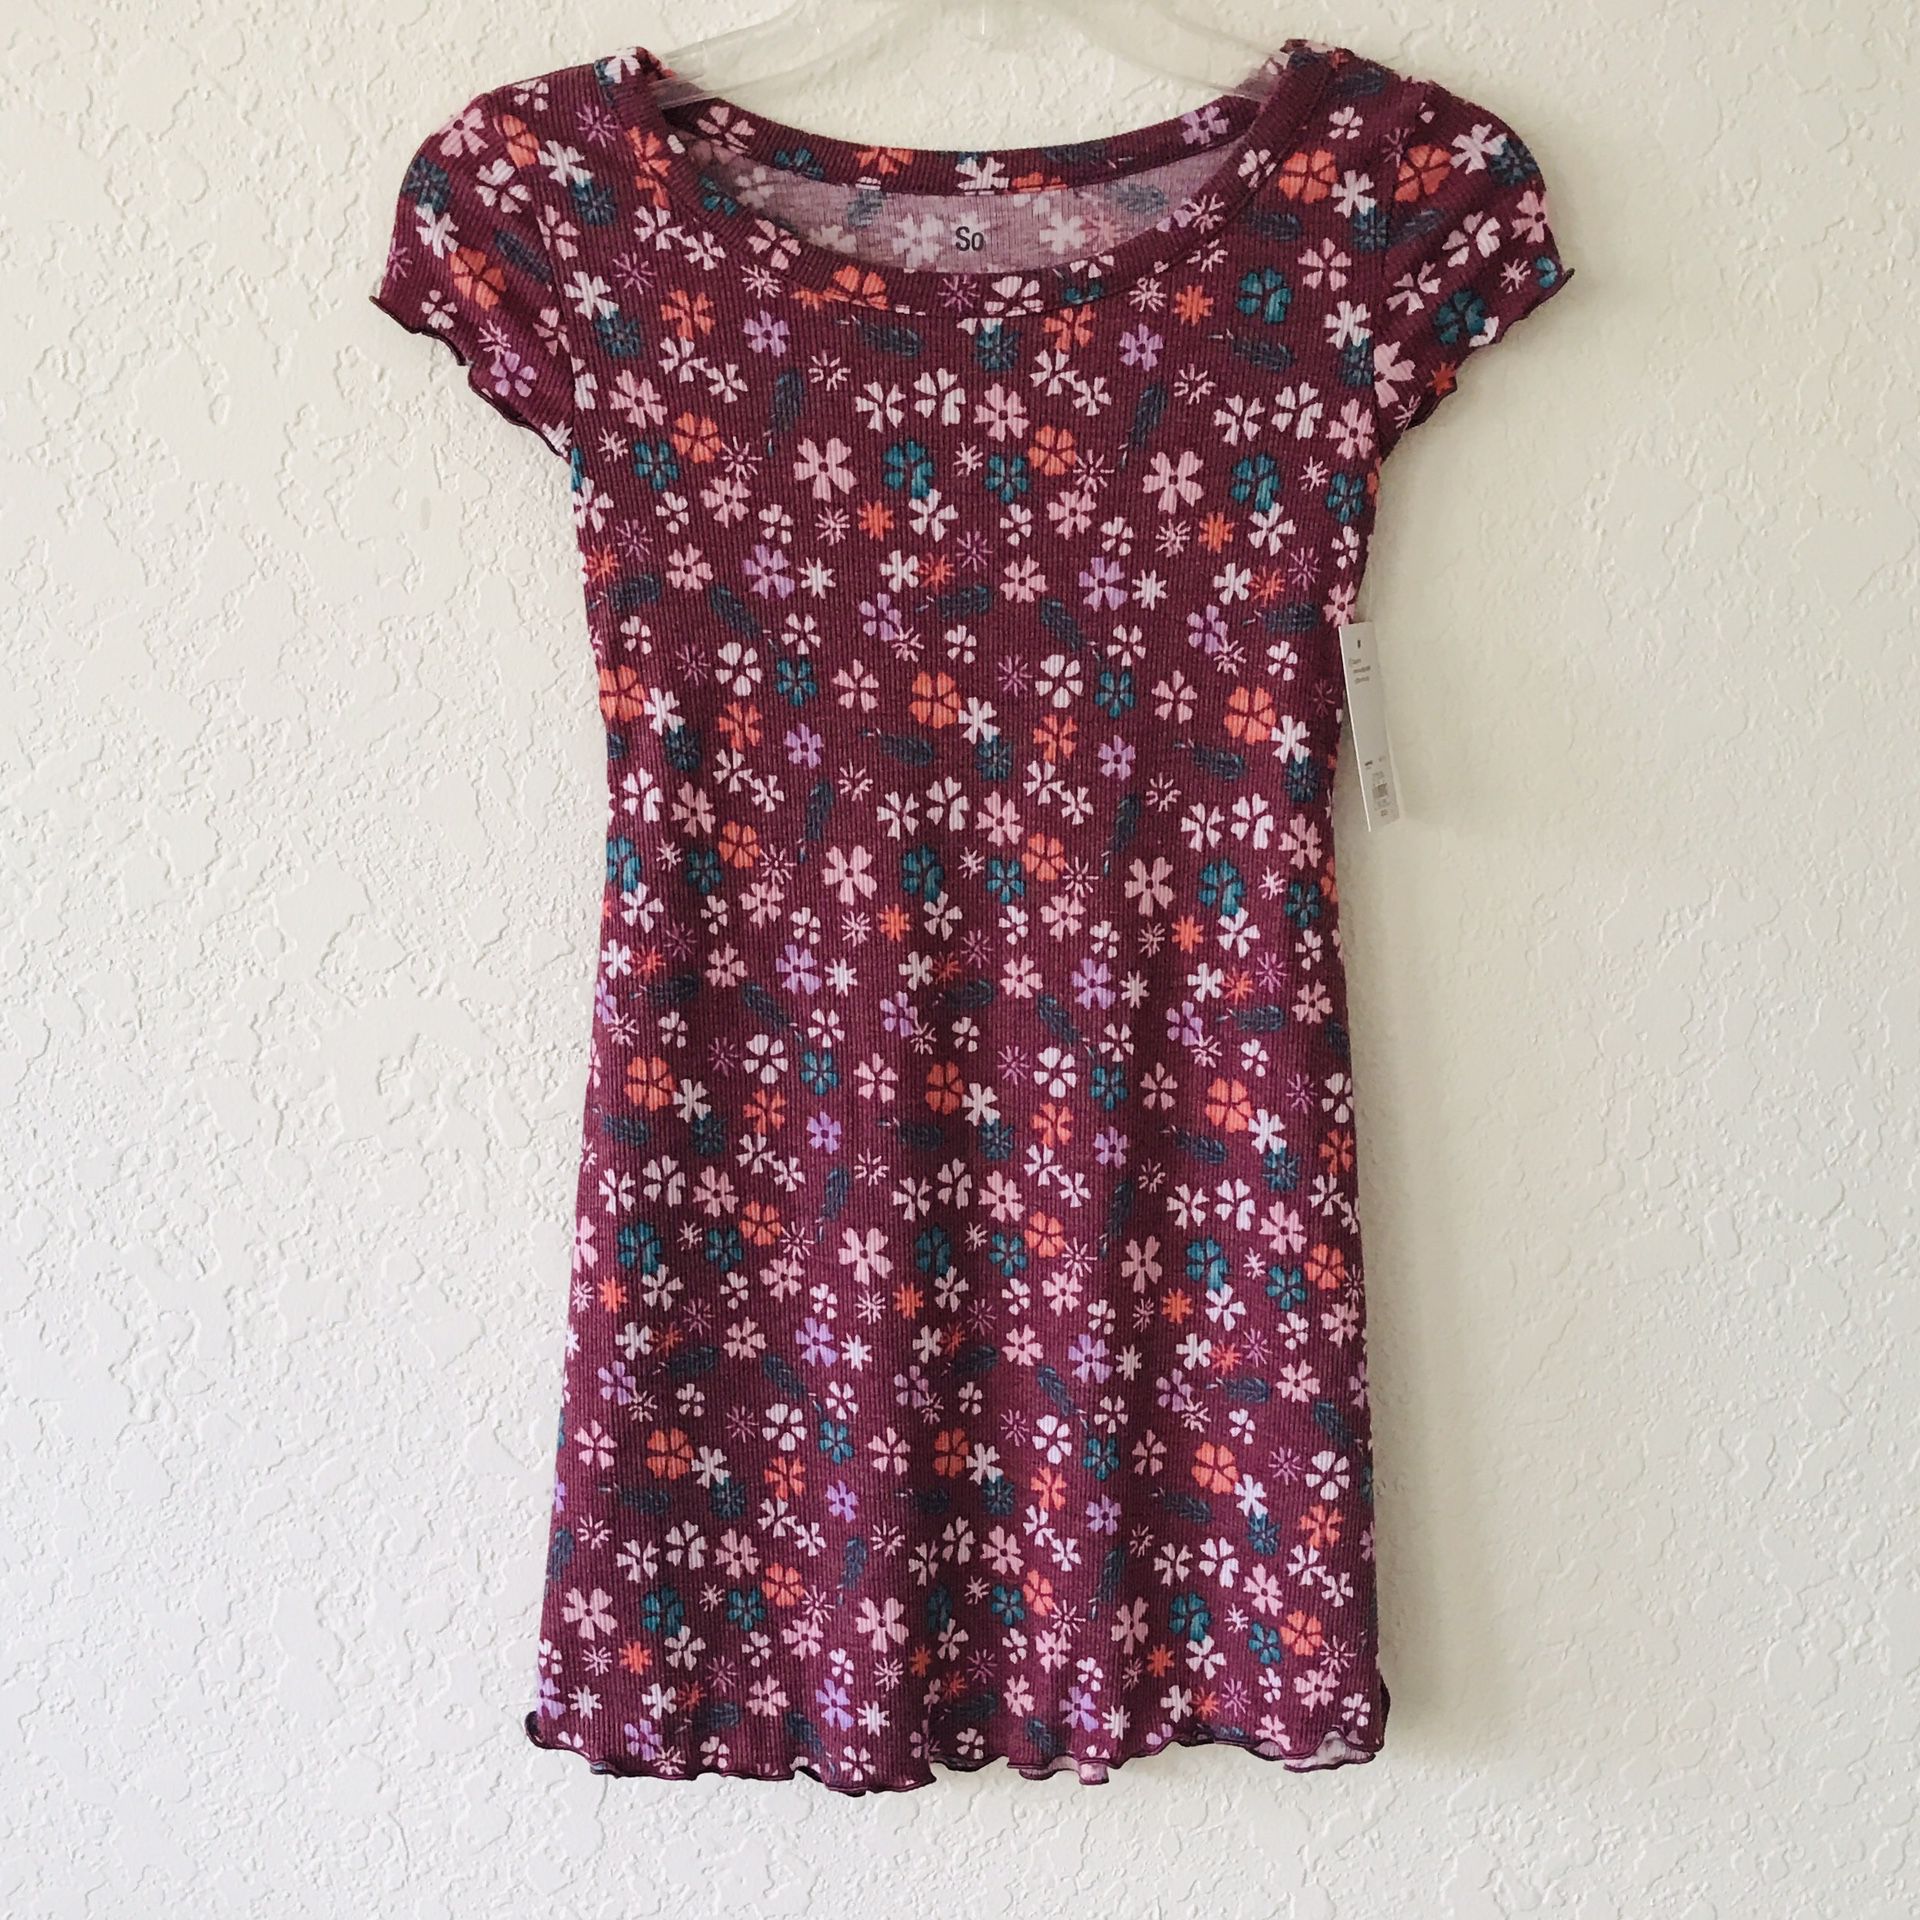 Girls Floral Multi Colored Dress Size 7 $12 NWT!